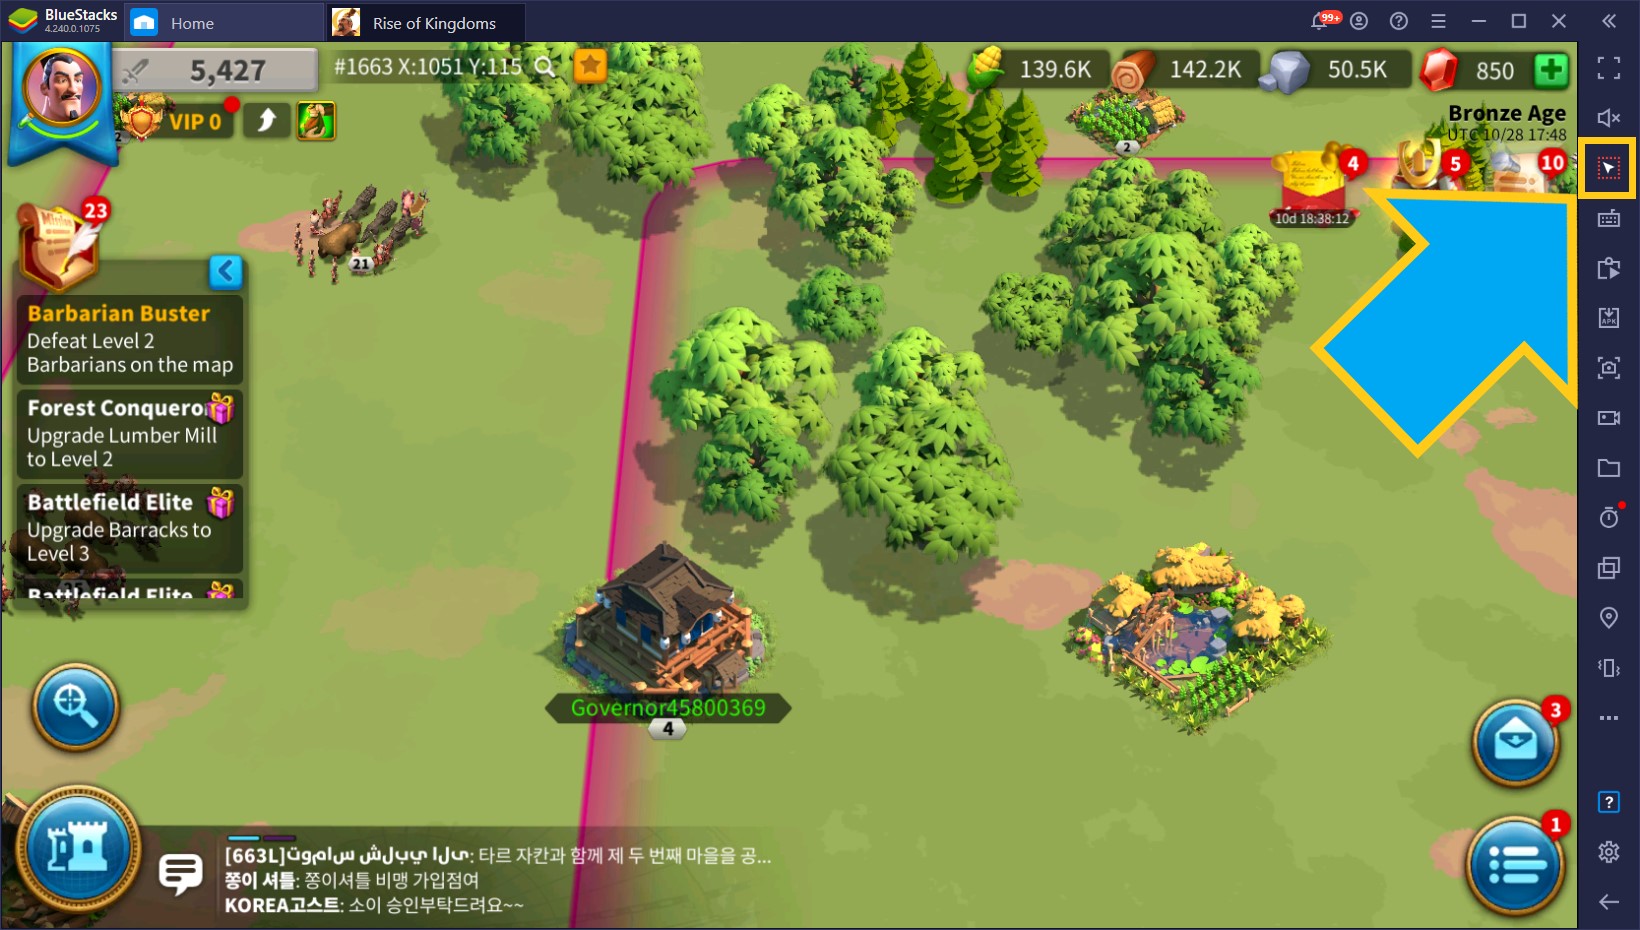 The New BlueStacks Smart Edge Scrolling Feature Will Redefine the Way You Play Rise of Kingdoms on PC